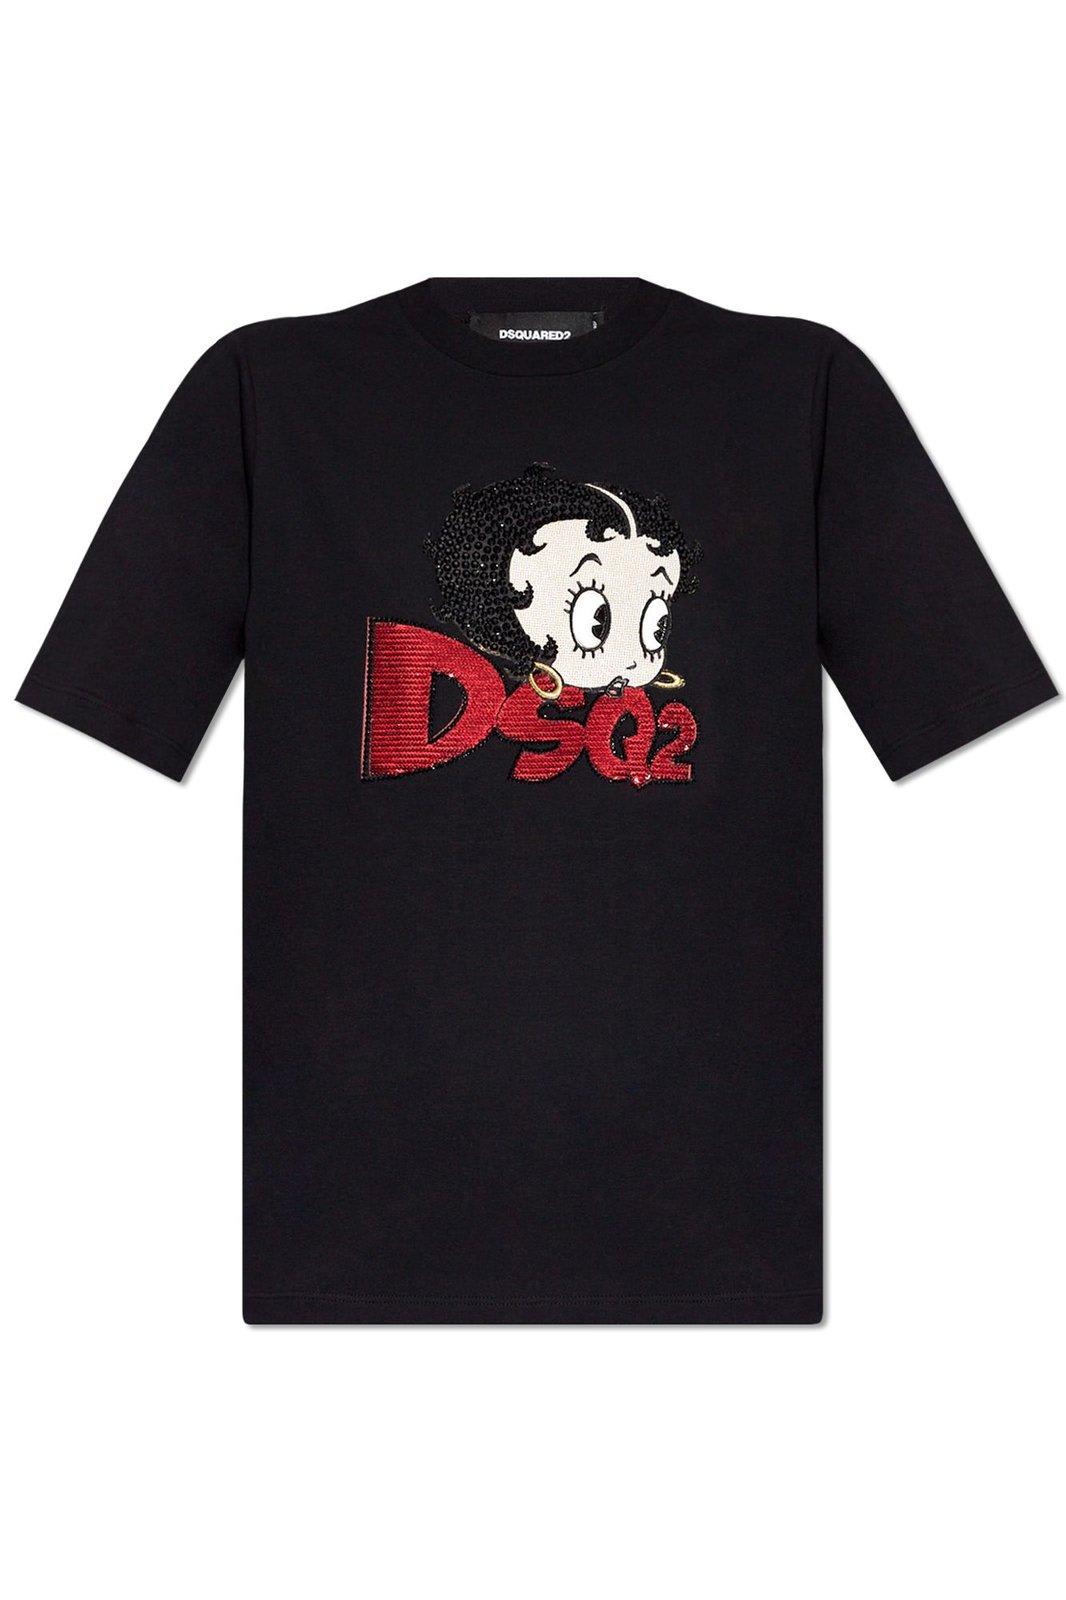 DSQUARED2 X BETTY BOOP SEQUIN EMBELLISHED T-SHIRT